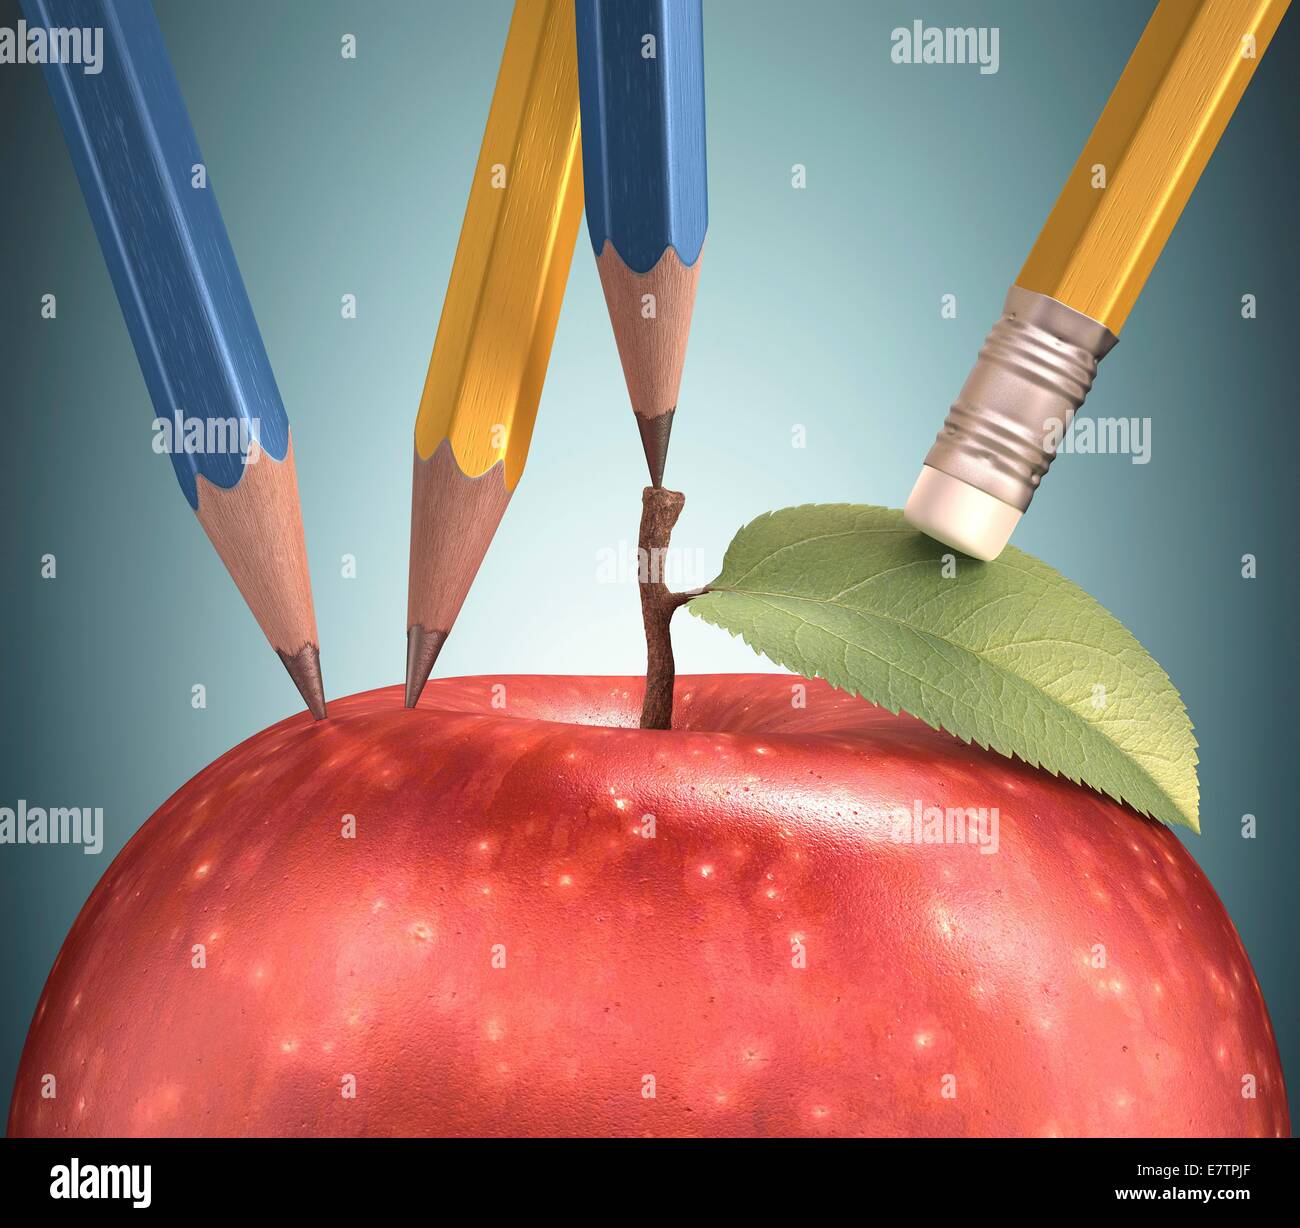 Red apple with pencils sticking into it, computer artwork. Stock Photo